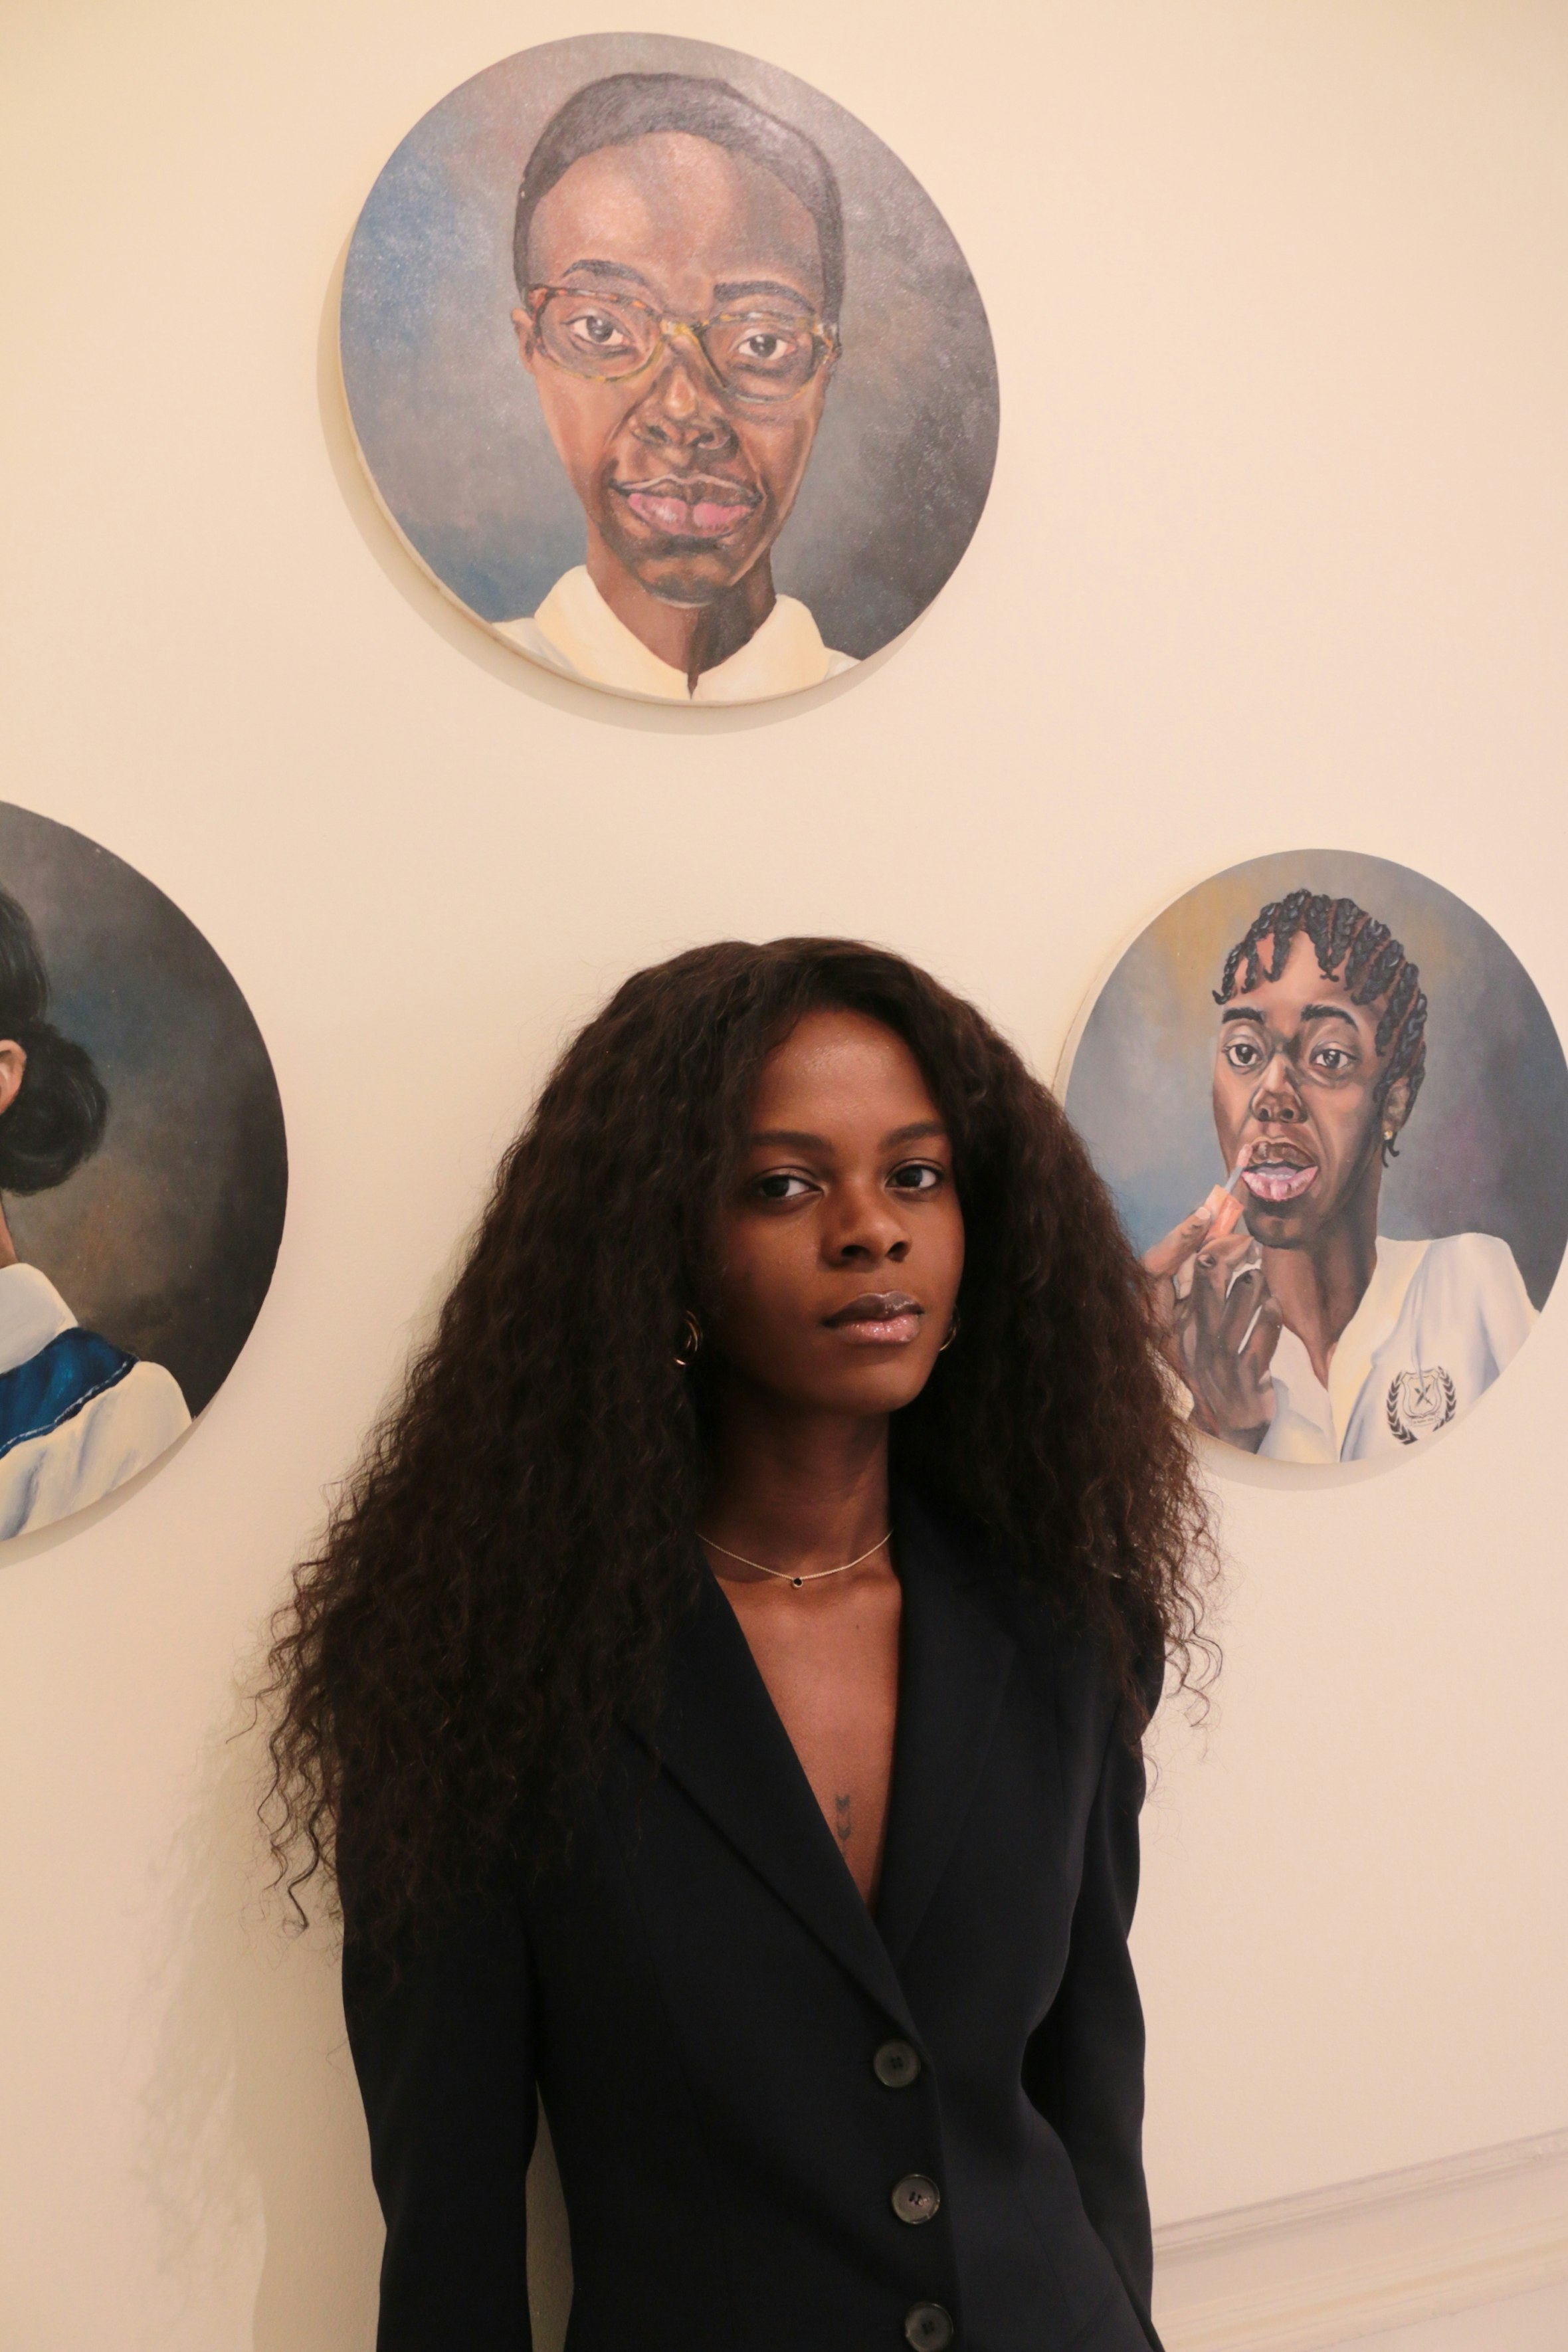 Polartics fasttracking the futures of young Black artists The Face